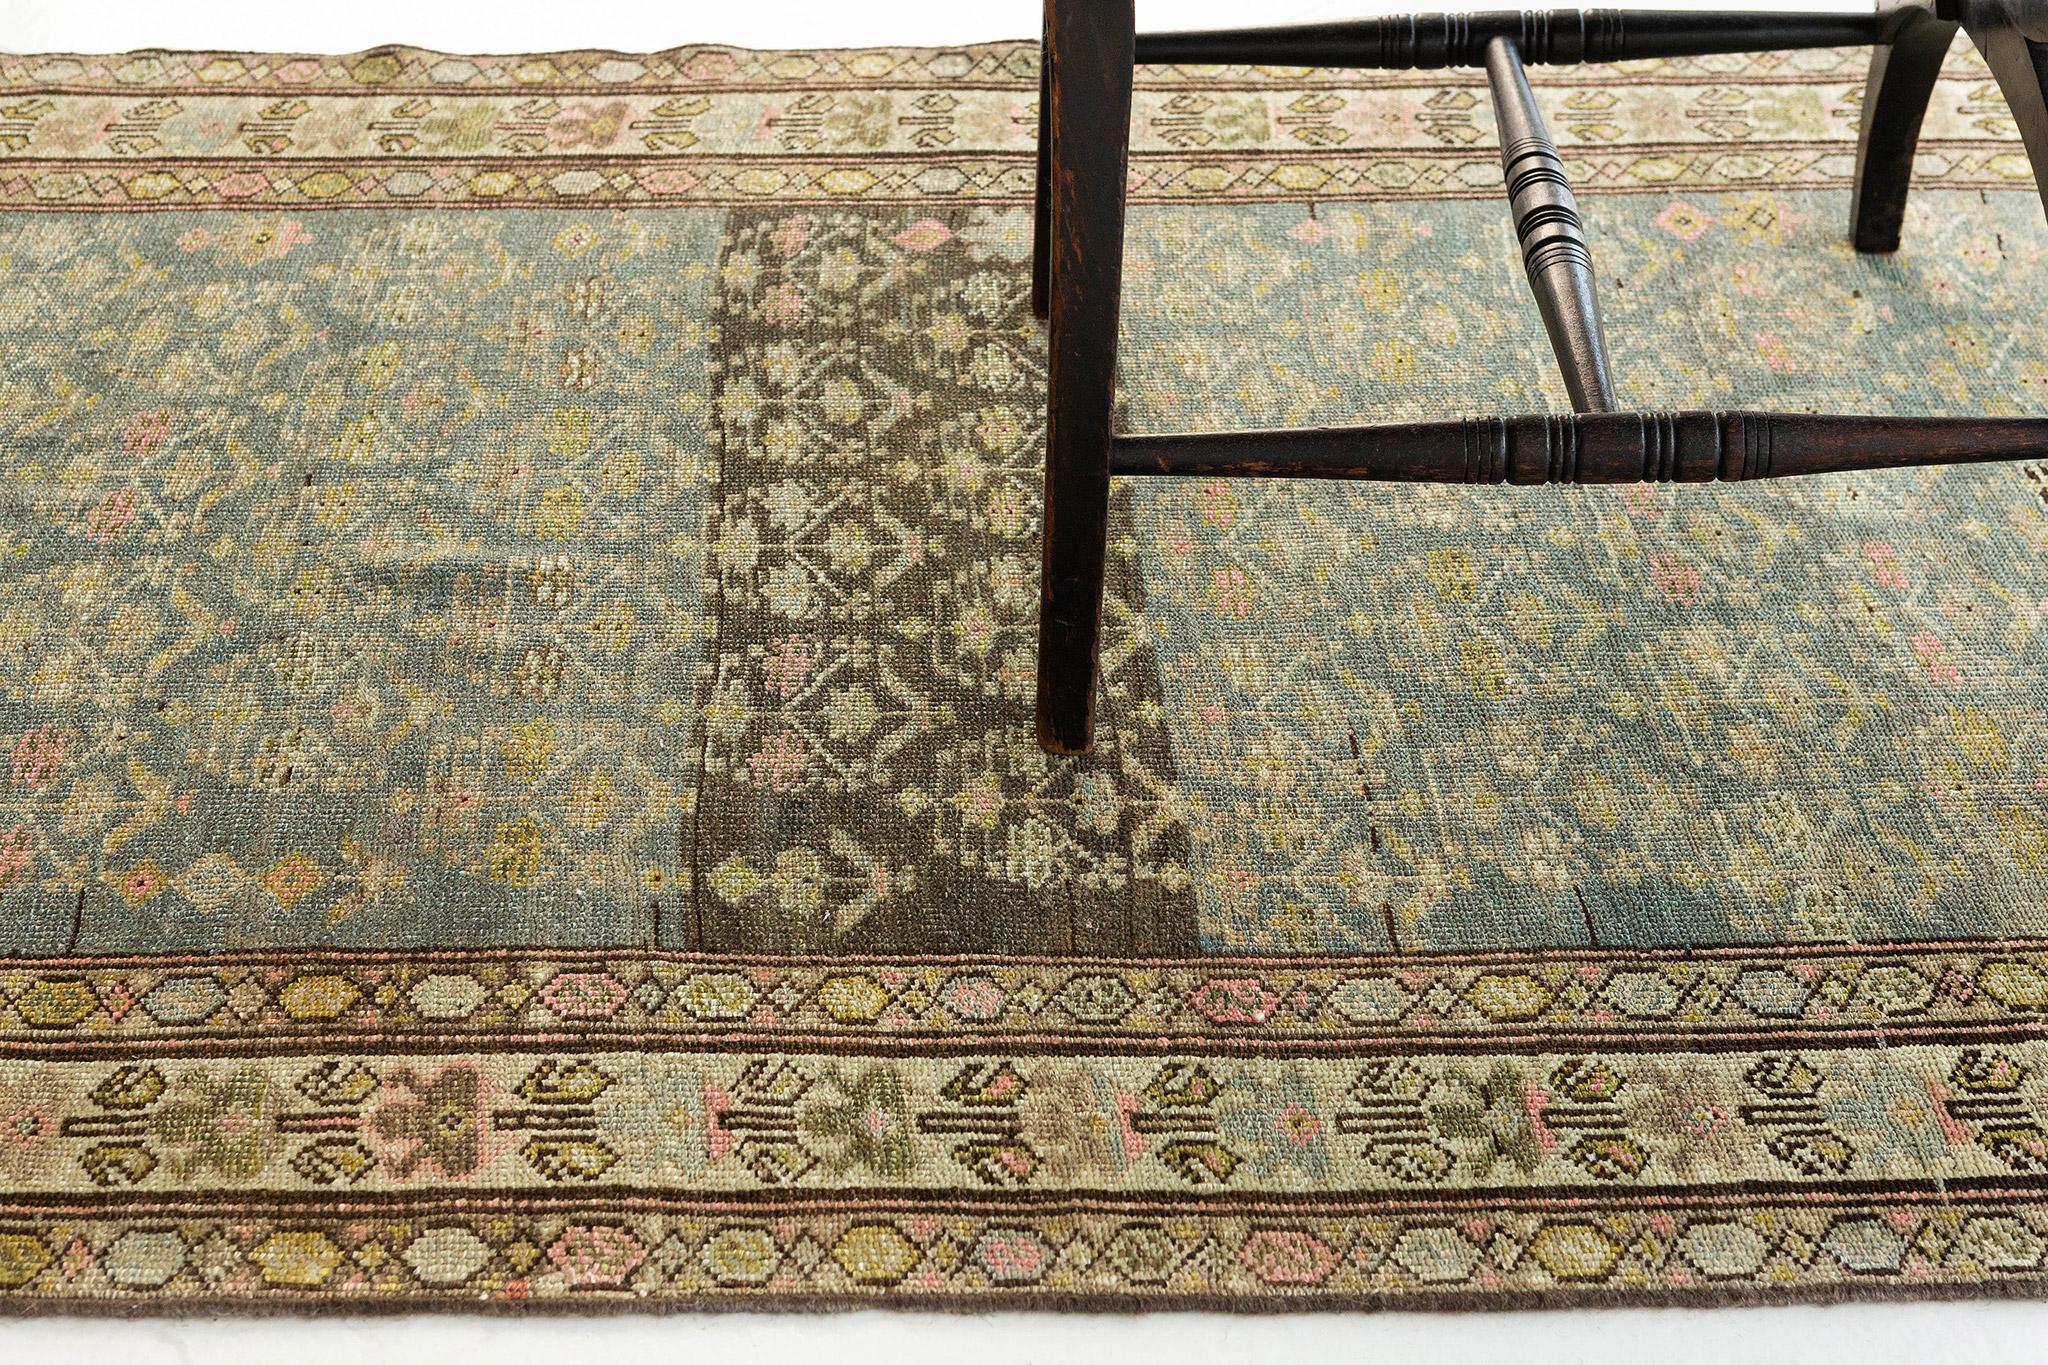 It is extraordinary something so rich in history and design blends so seamlessly into nearly any décor, even the most minimalist style. Featuring an elaborate repetitive design, this cleverly composed antique Malayer runner delivers a mesmerizing